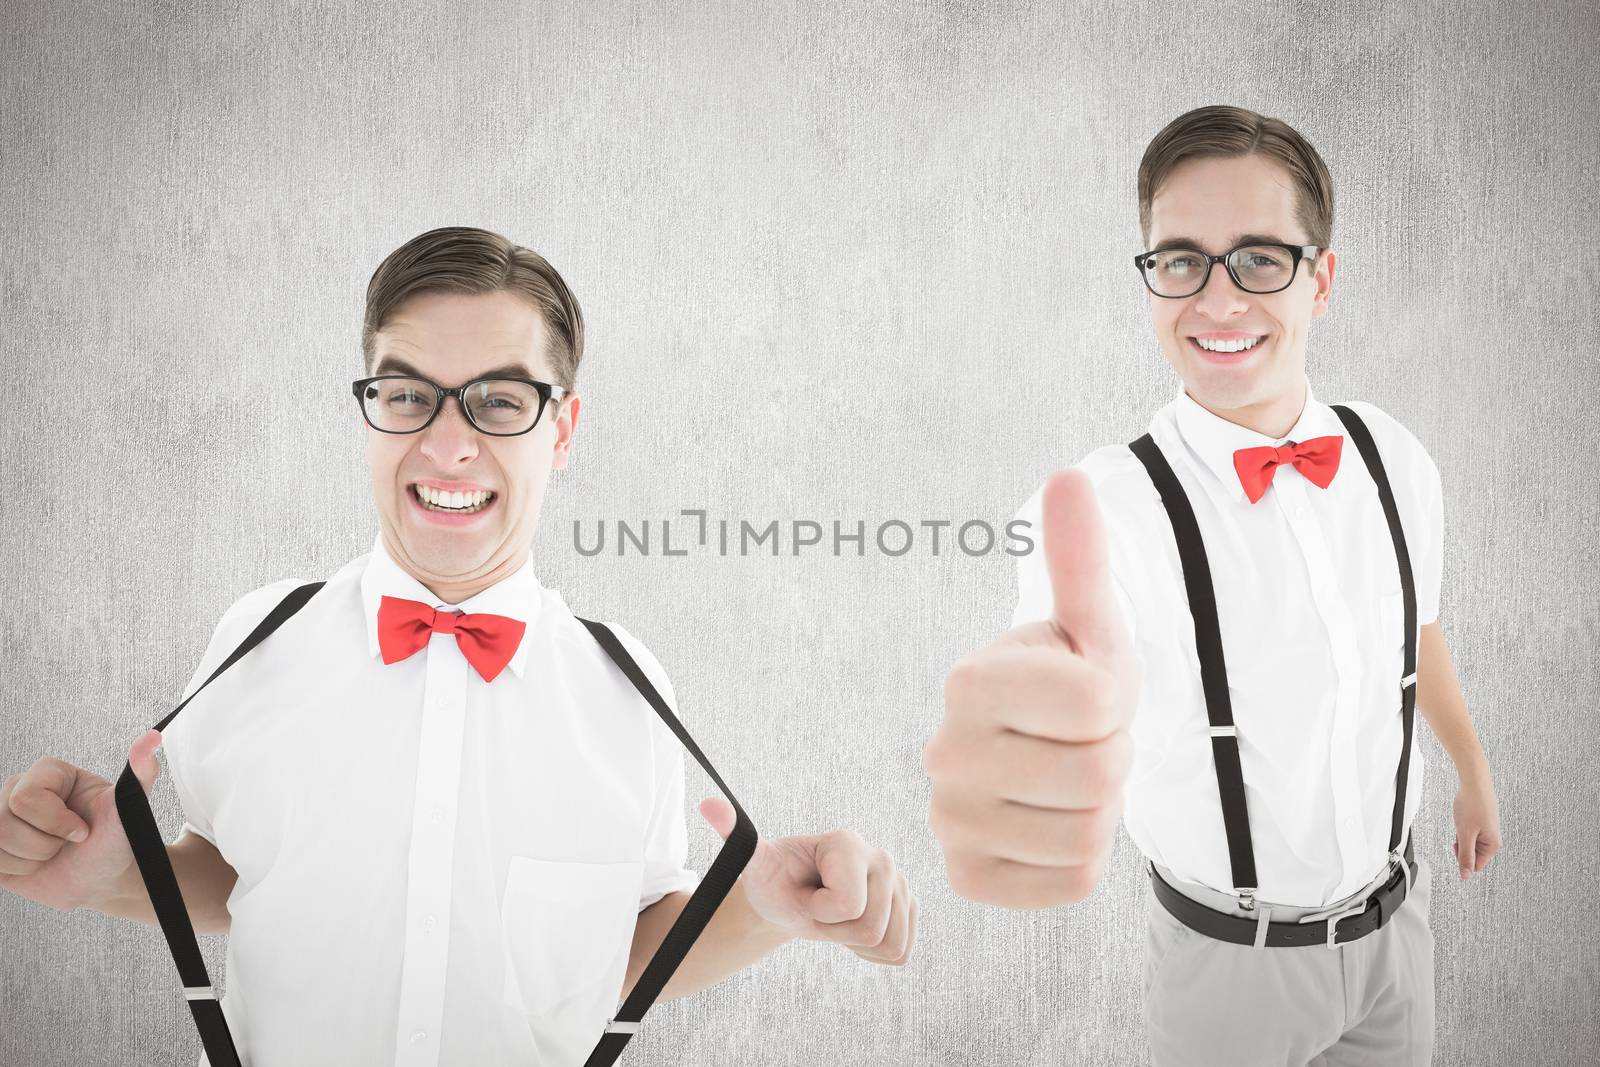 Nerd showing thumbs up against white and grey background